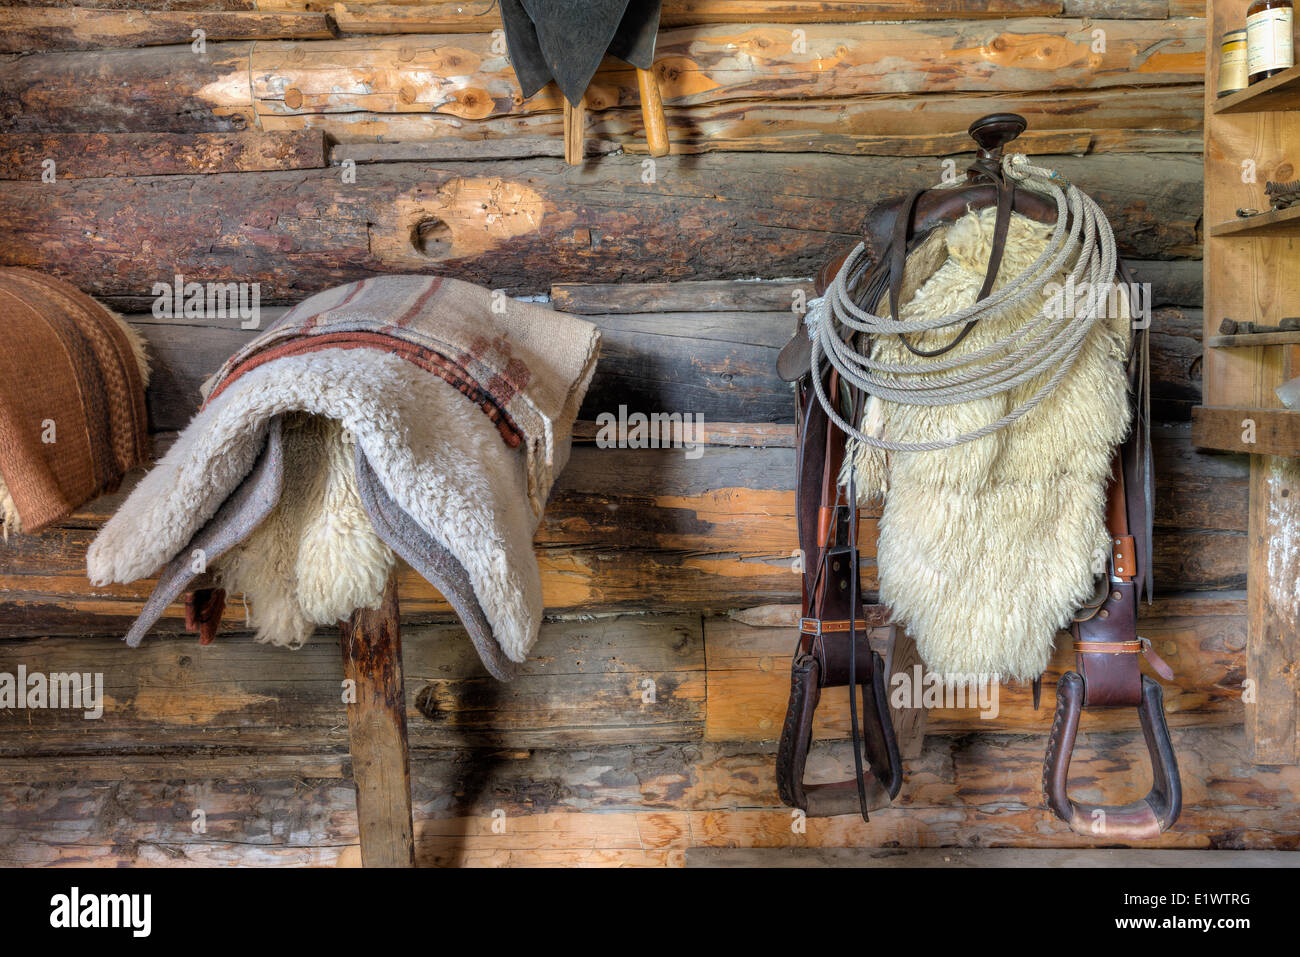 Saddle and blankets in a horse barn, Bar U Ranch National Historic Site, Alberta, Canada Stock Photo